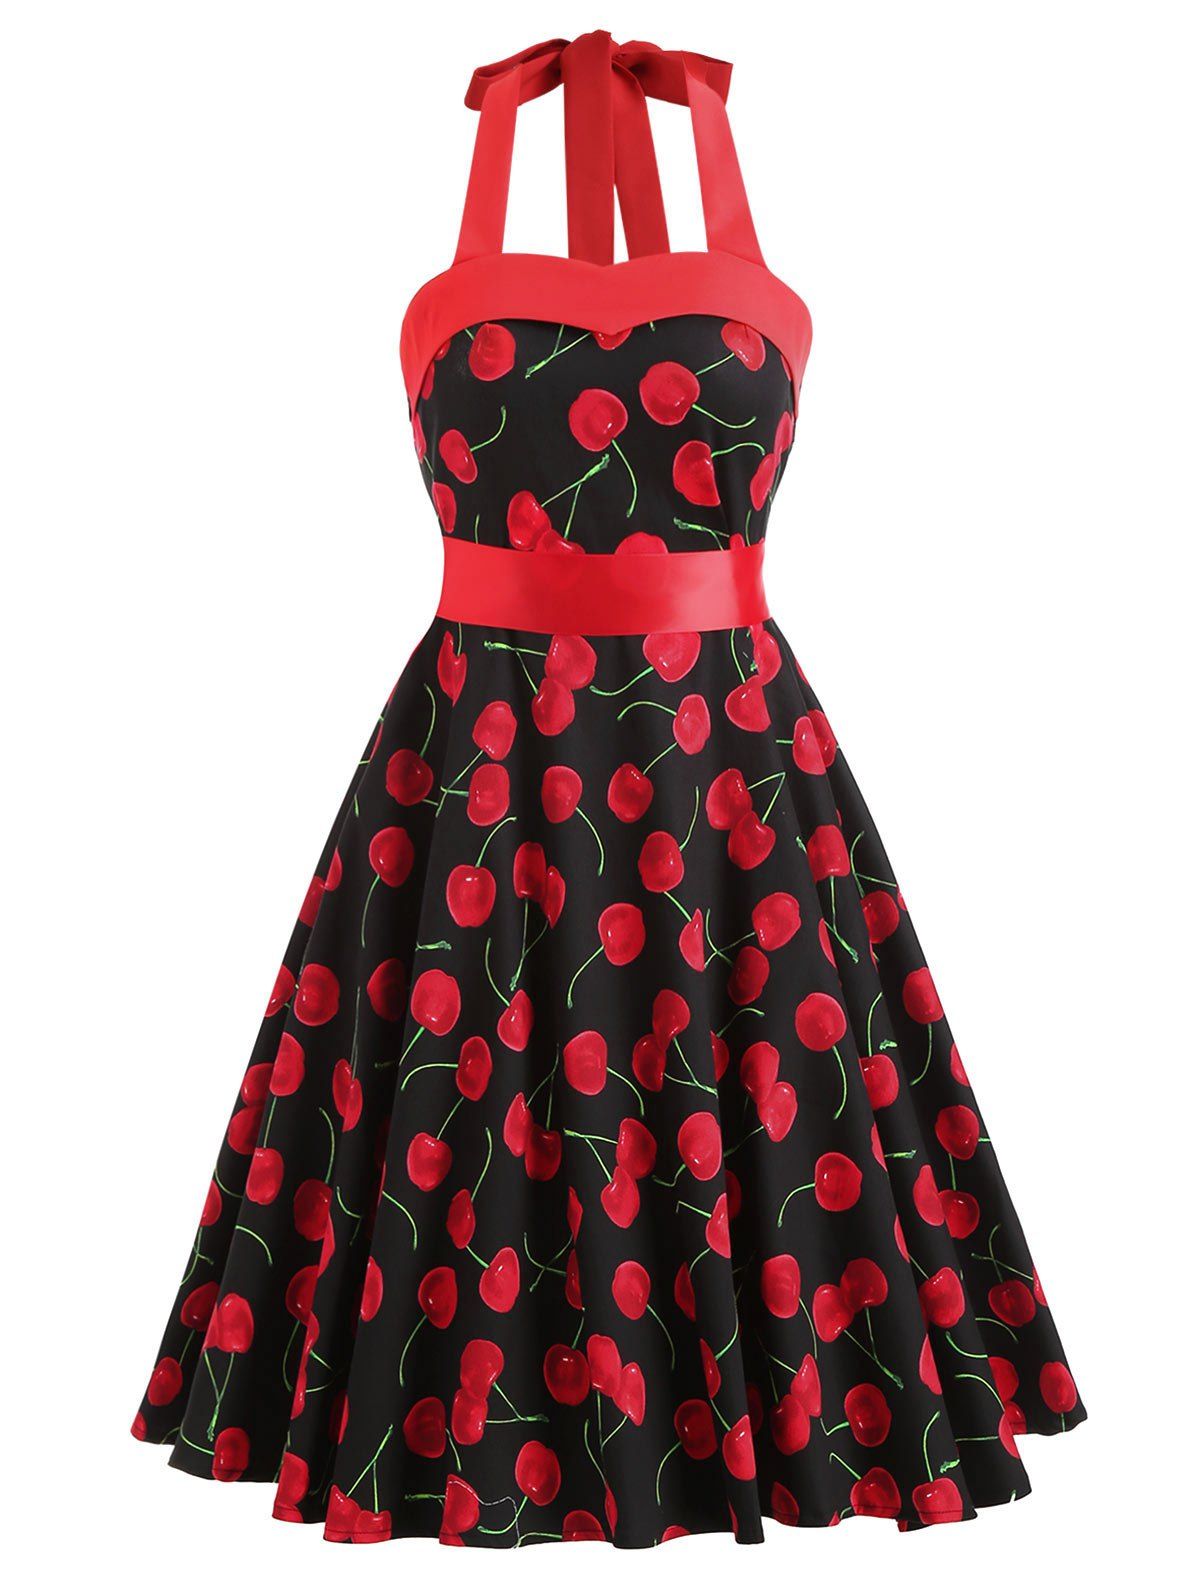 Cherry Print Lace Up Belted Dress - RED M